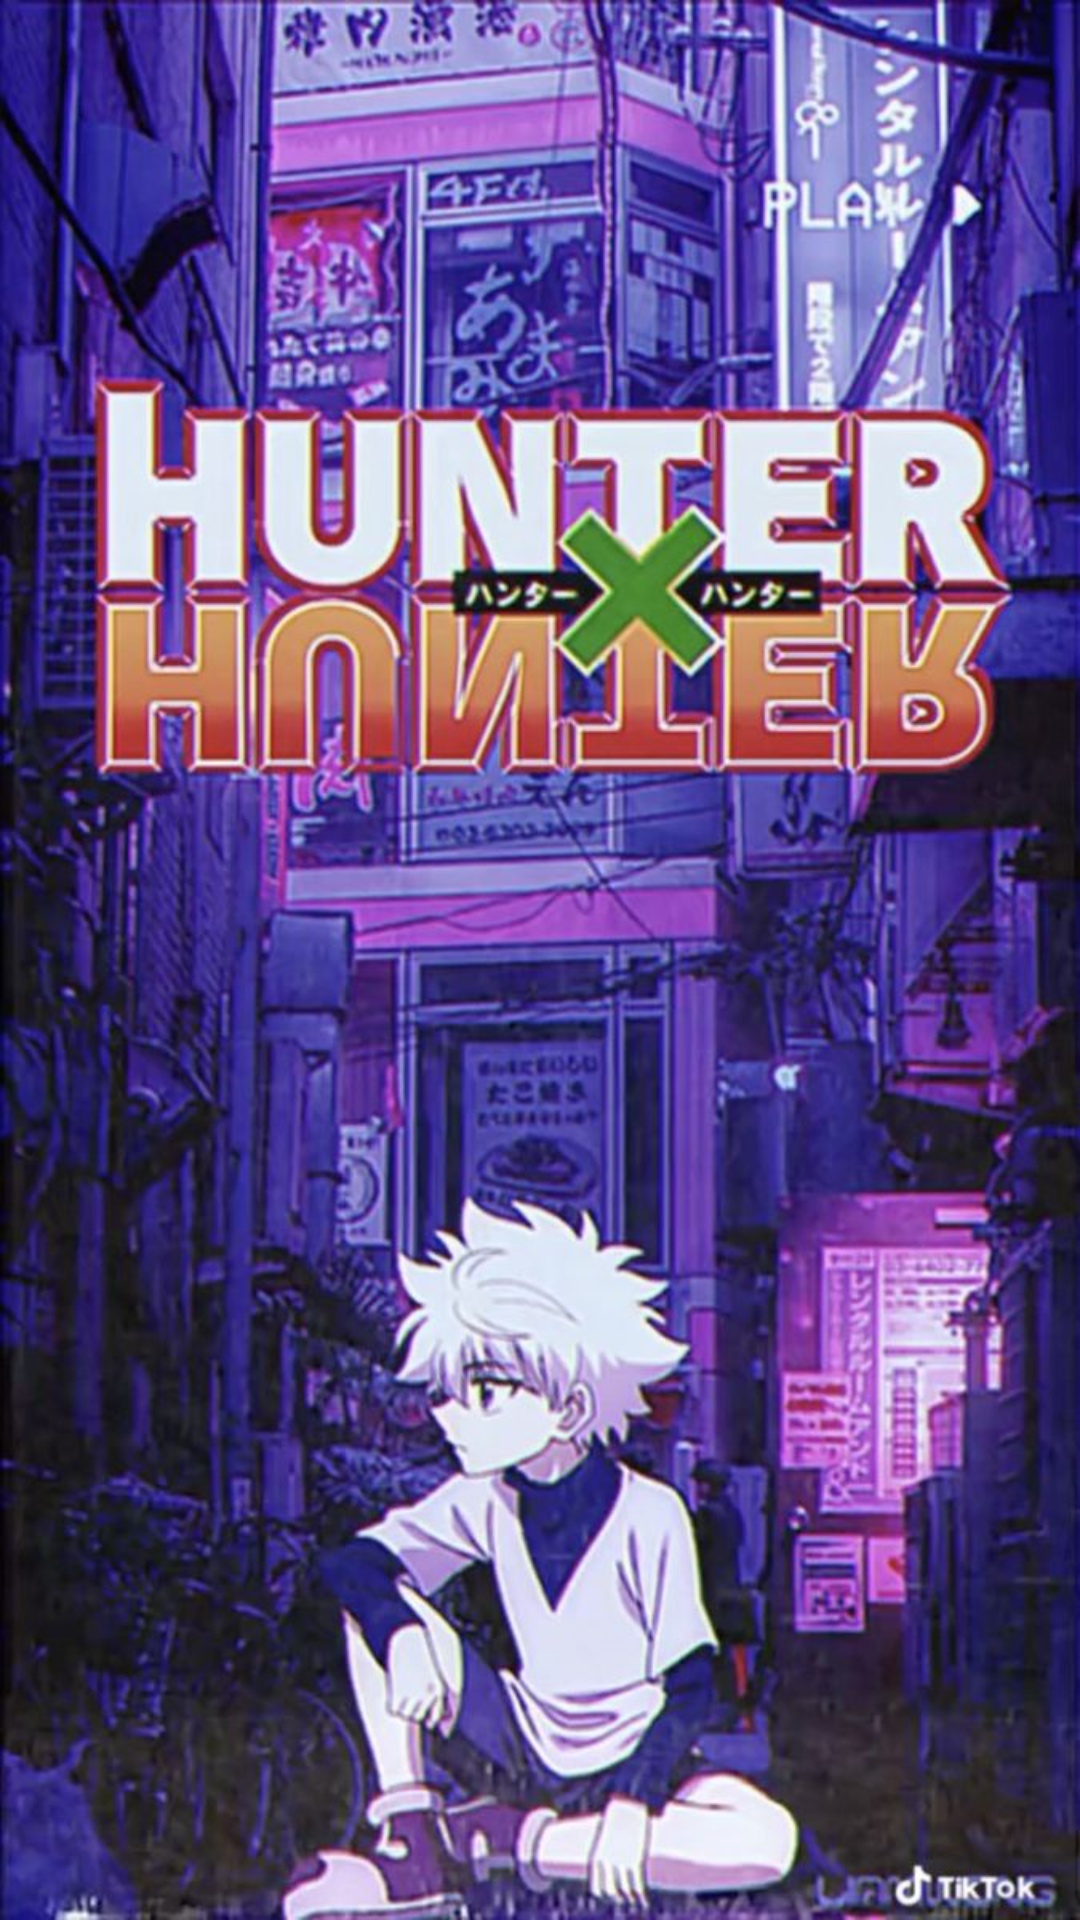 Download Unlock Your Imagination with the Hunter X Hunter iPhone Wallpaper